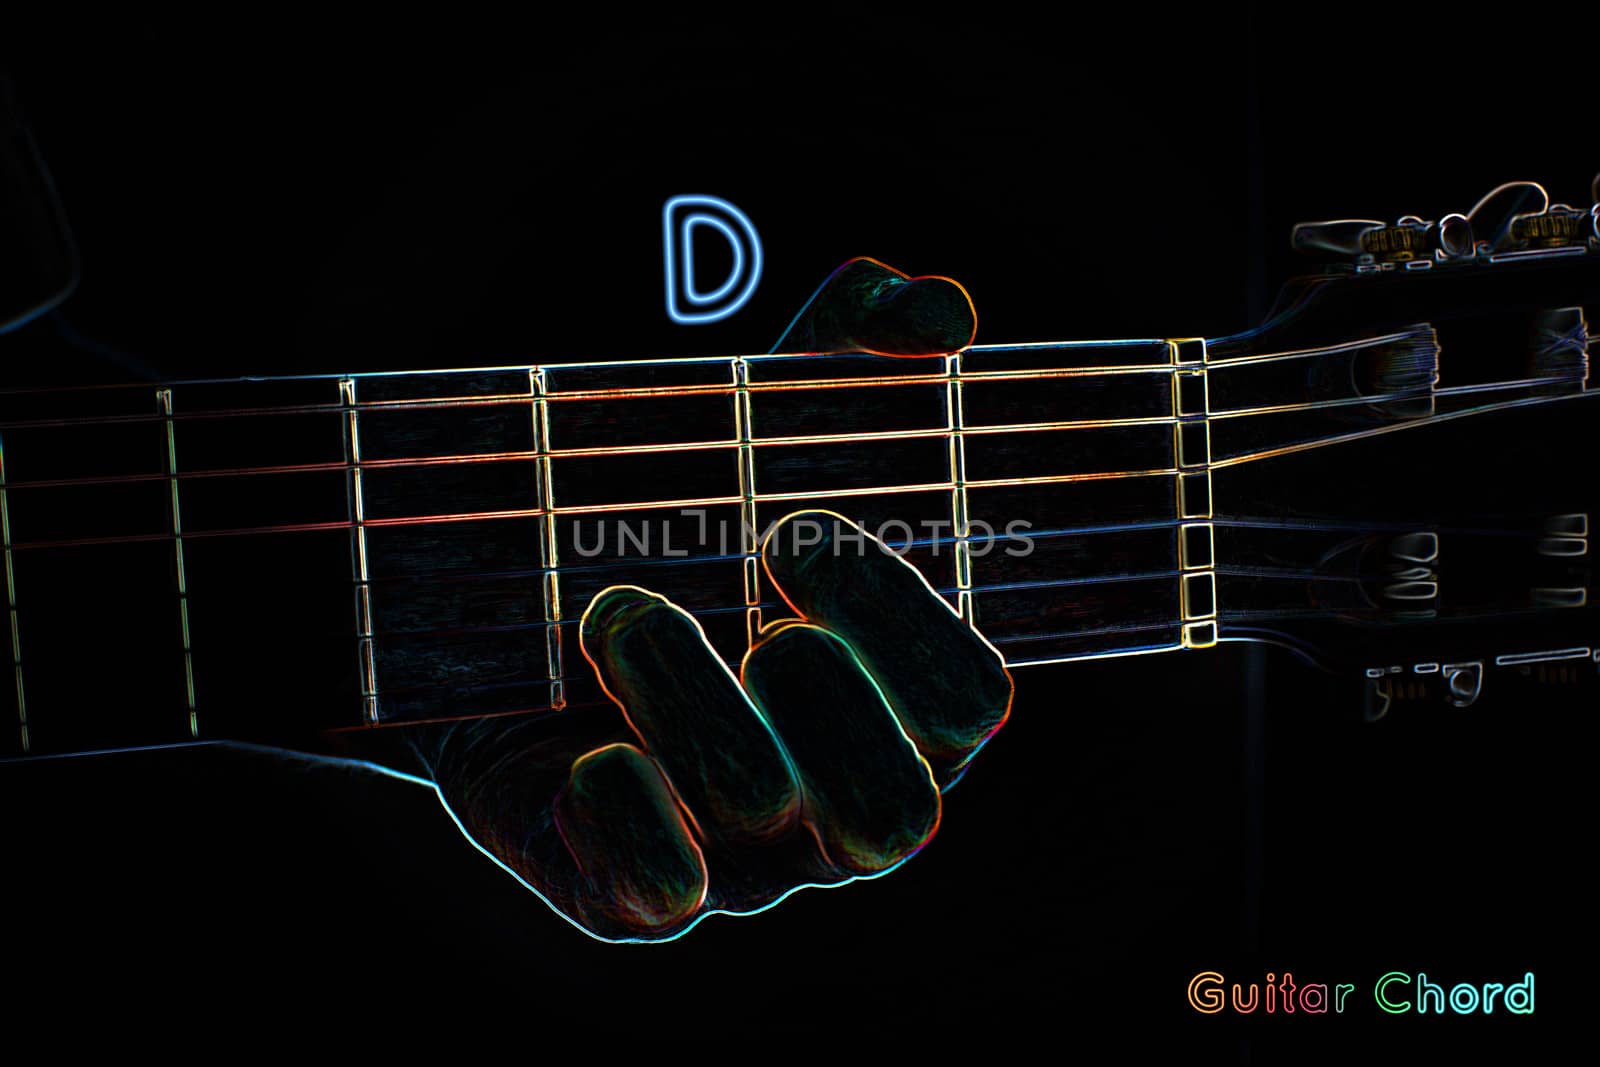 Guitar chord on a dark background, stylized illustration of an X-ray. D major chord